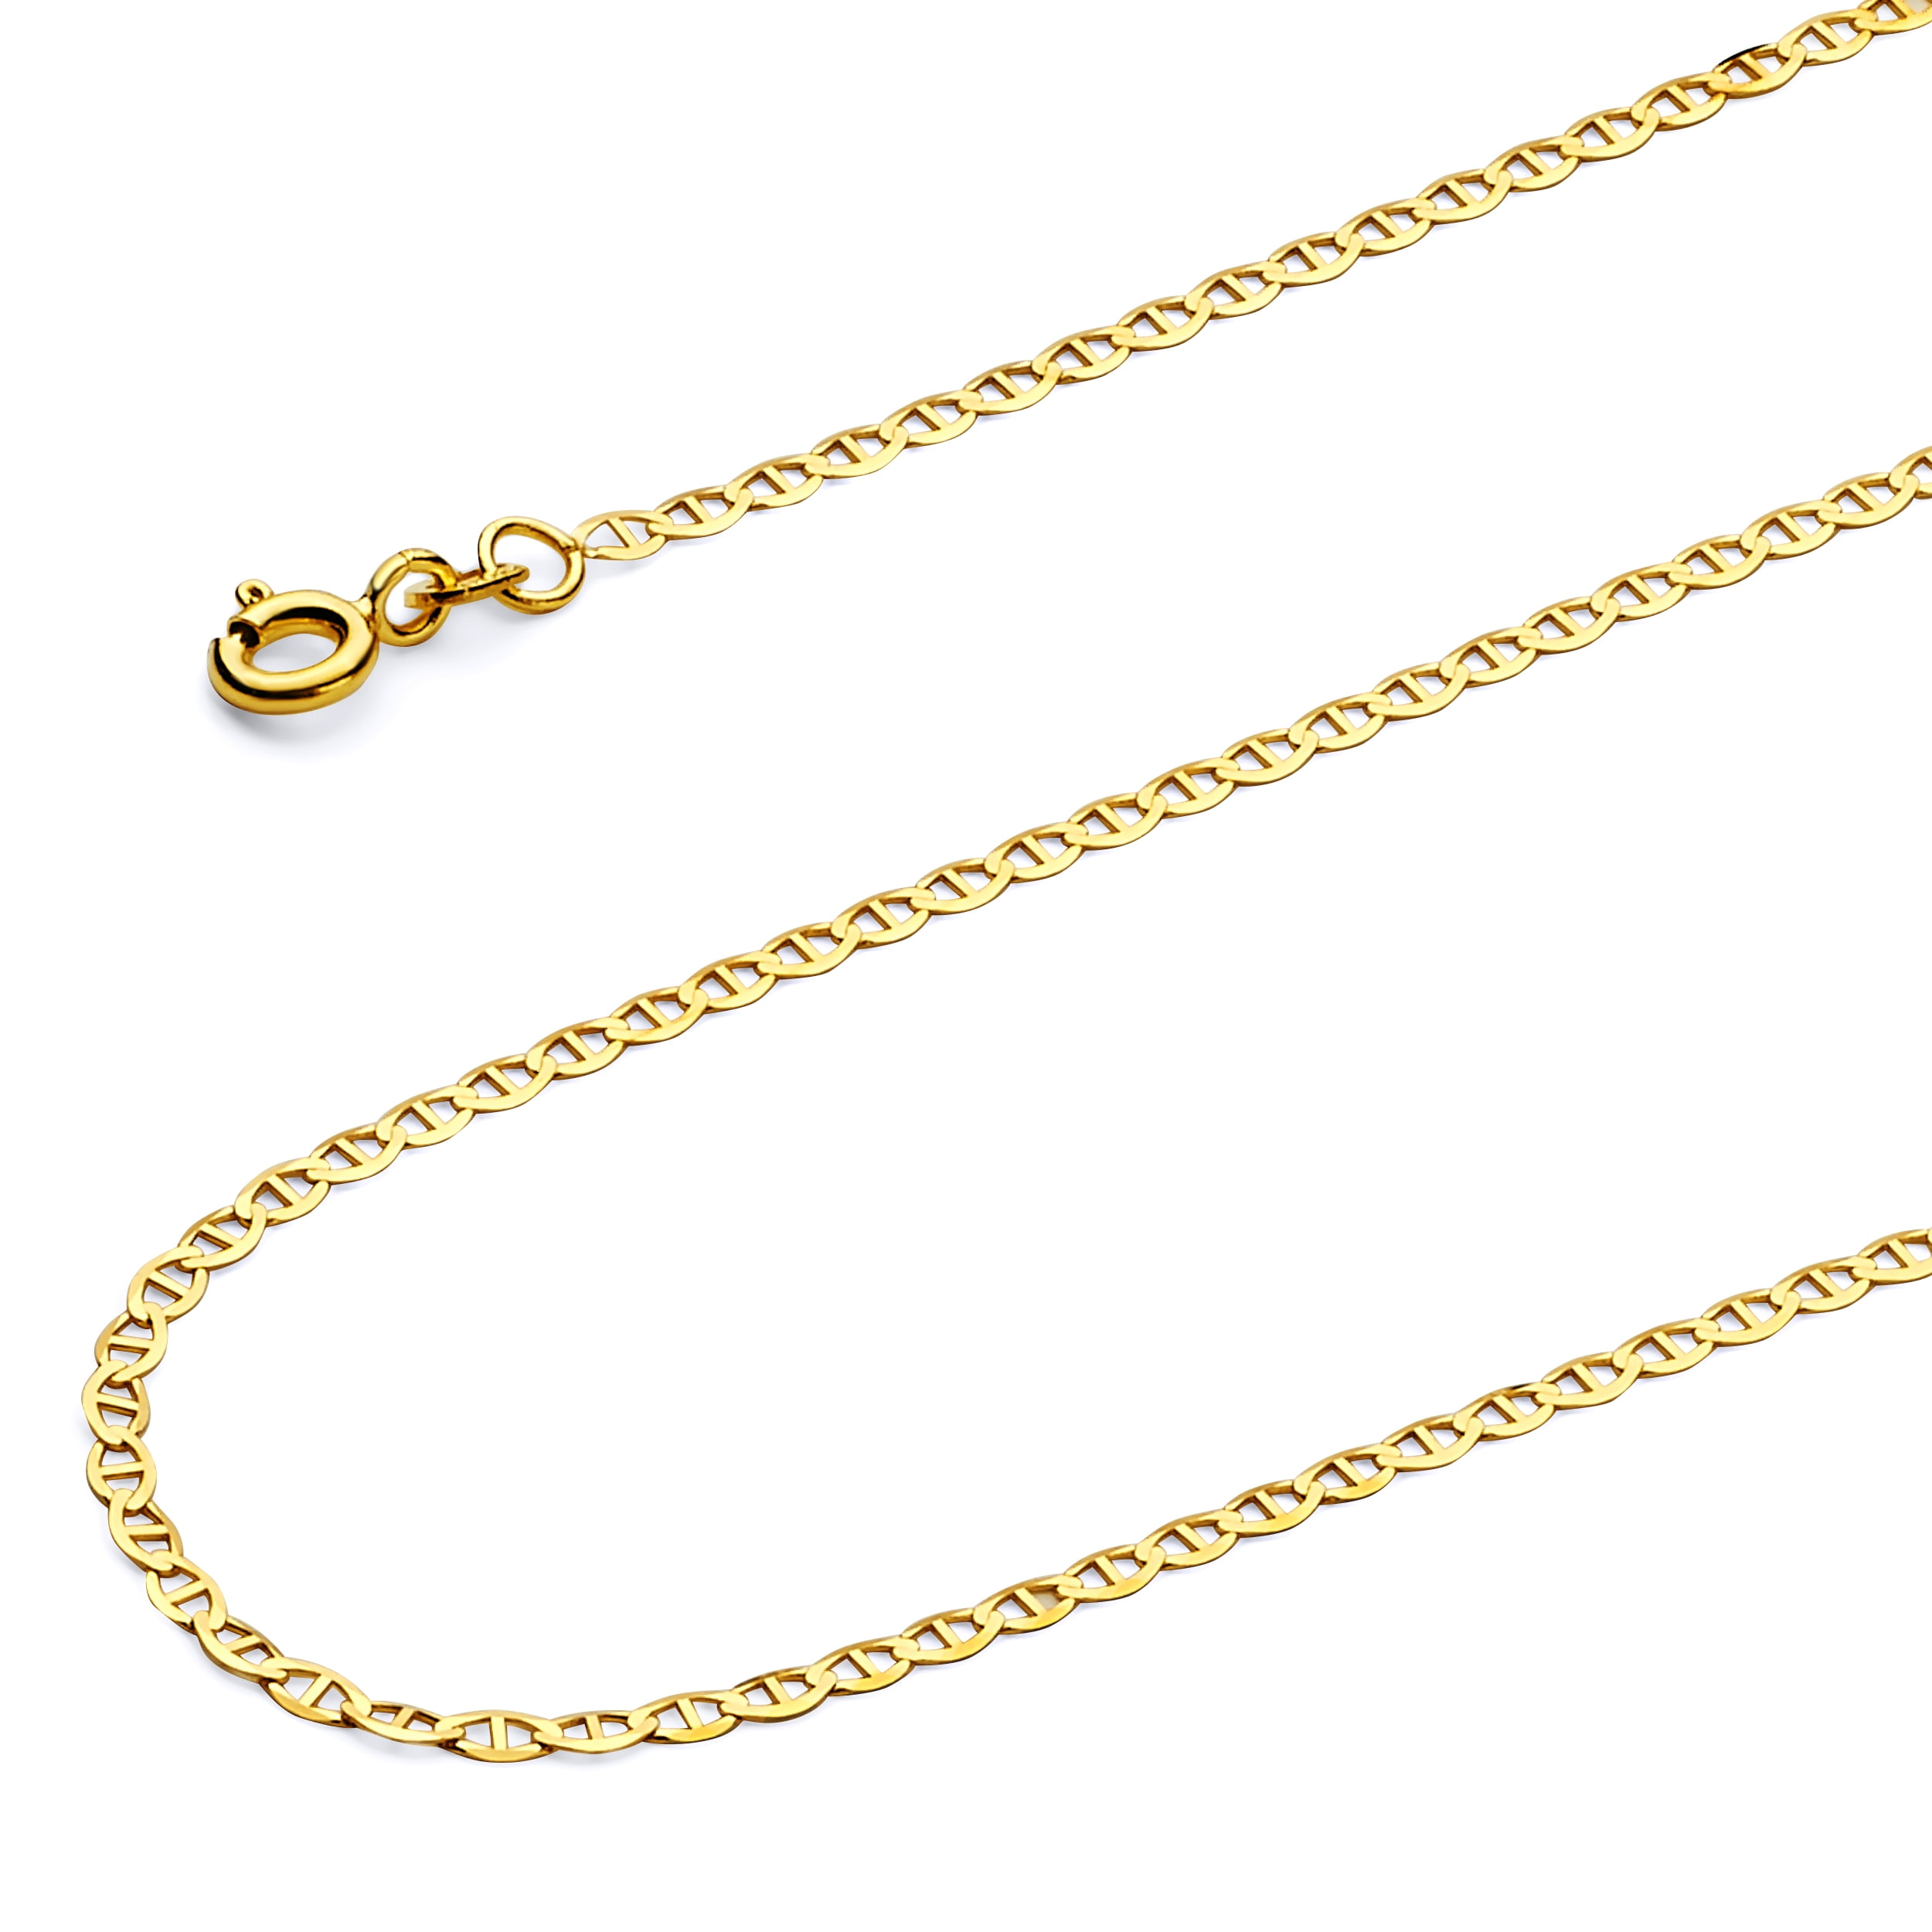 Length Options 14k Yellow Gold 1.4mm Singapore Chain Necklace Spring Ring Closure 16 18 20 24 